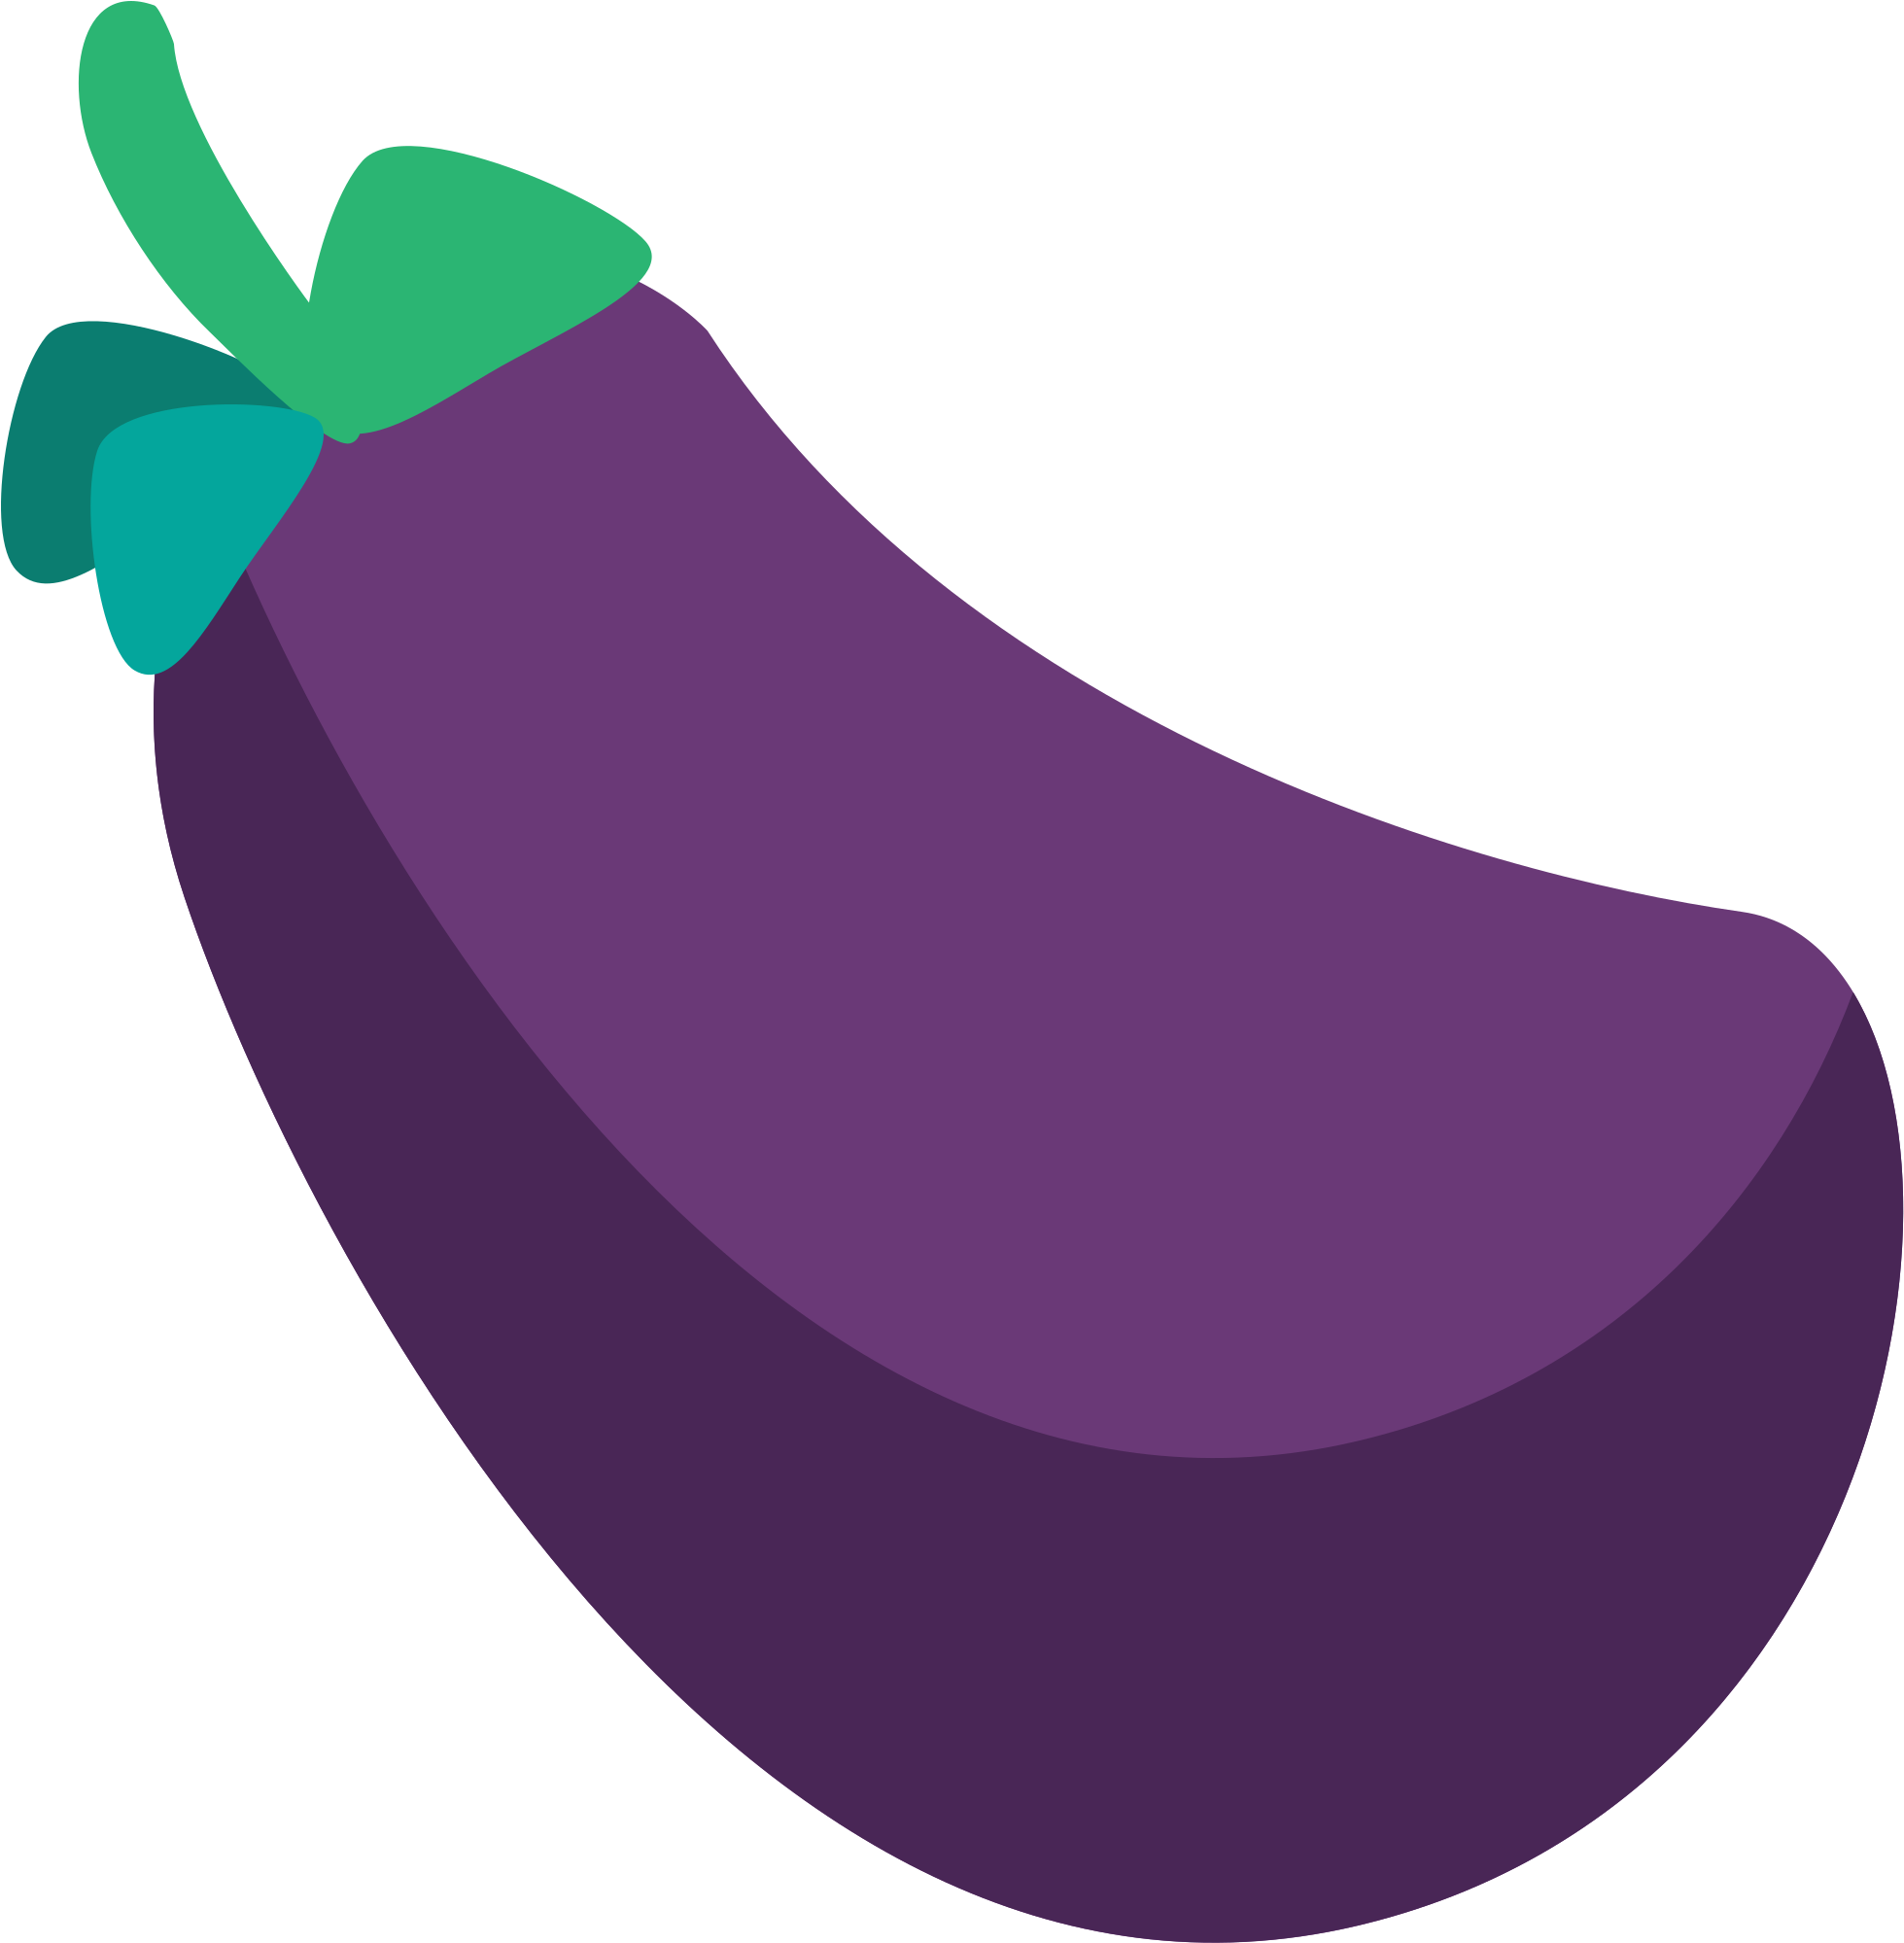 A Purple Eggplant With Green Leaves